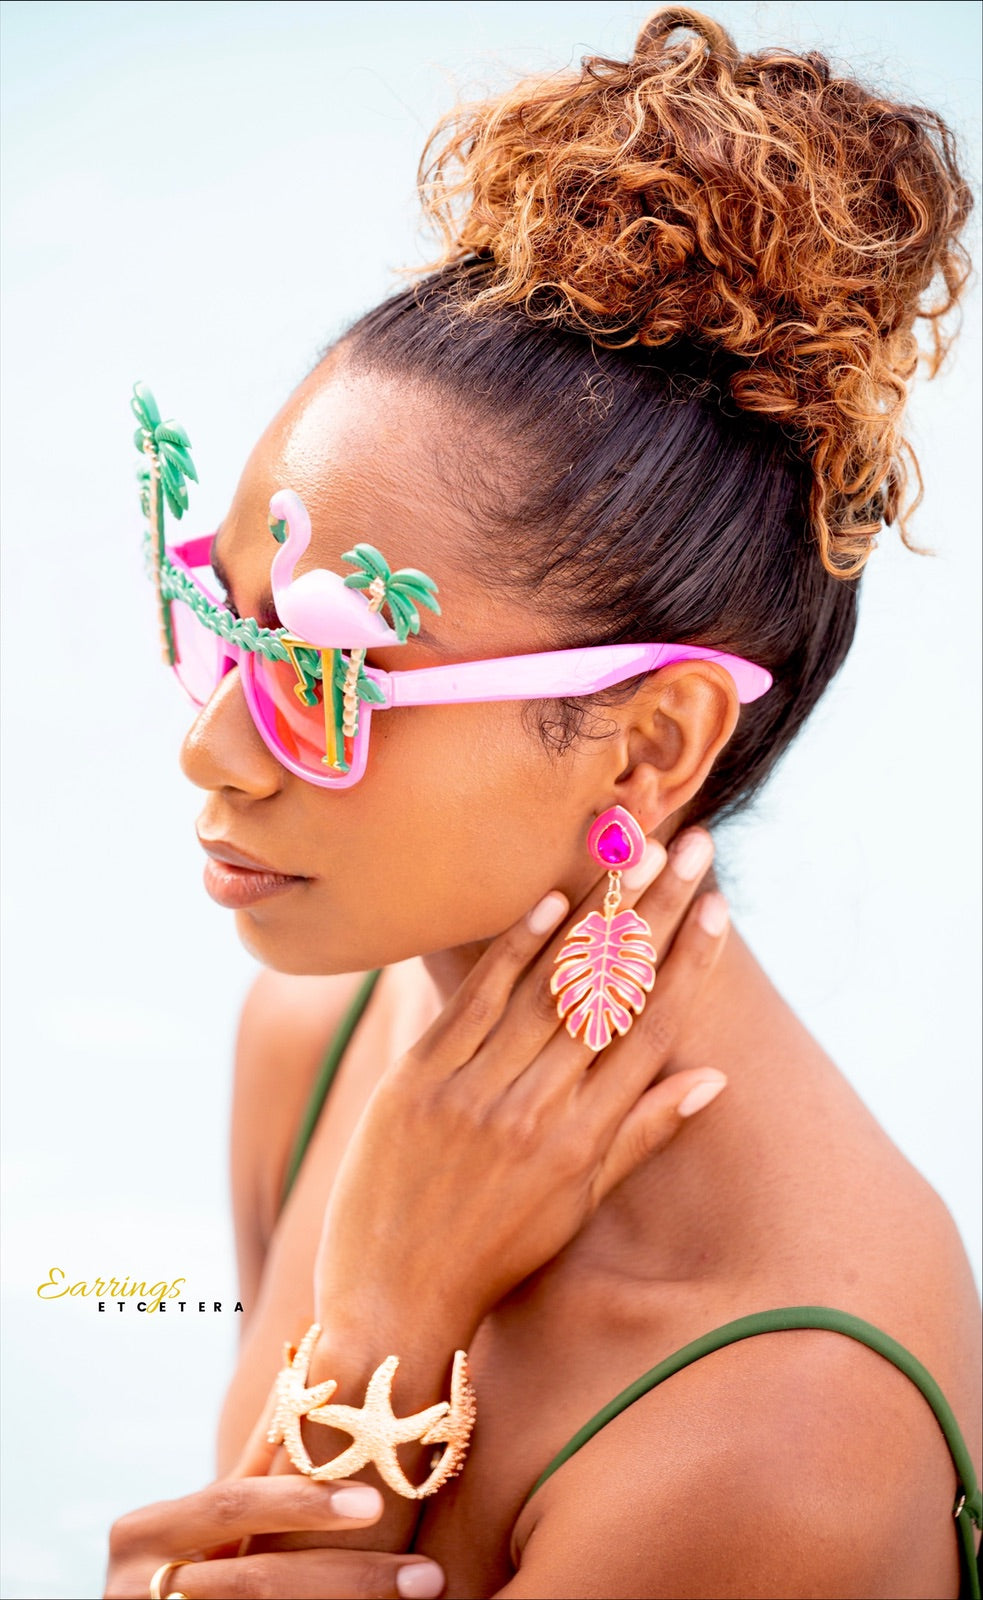 TROPICAL VIBES STATEMENT EARRINGS